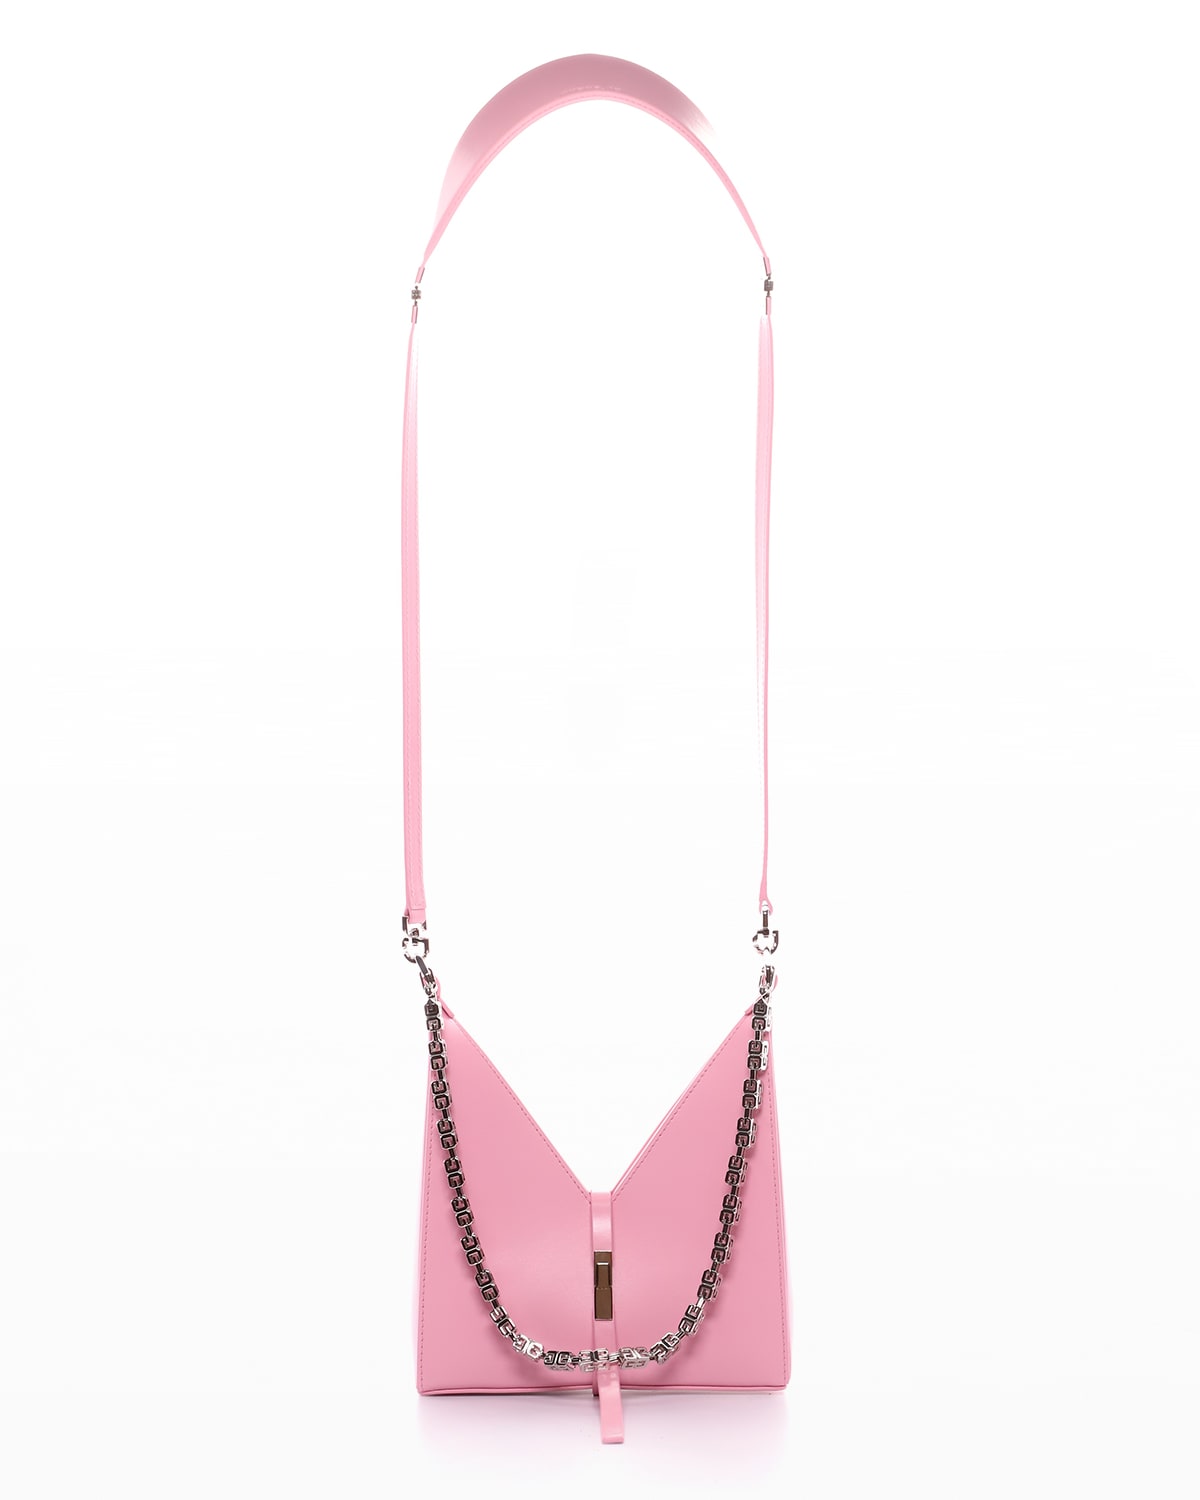 Givenchy Cutout Mini Shoulder Bag with Chain, Baby Pink